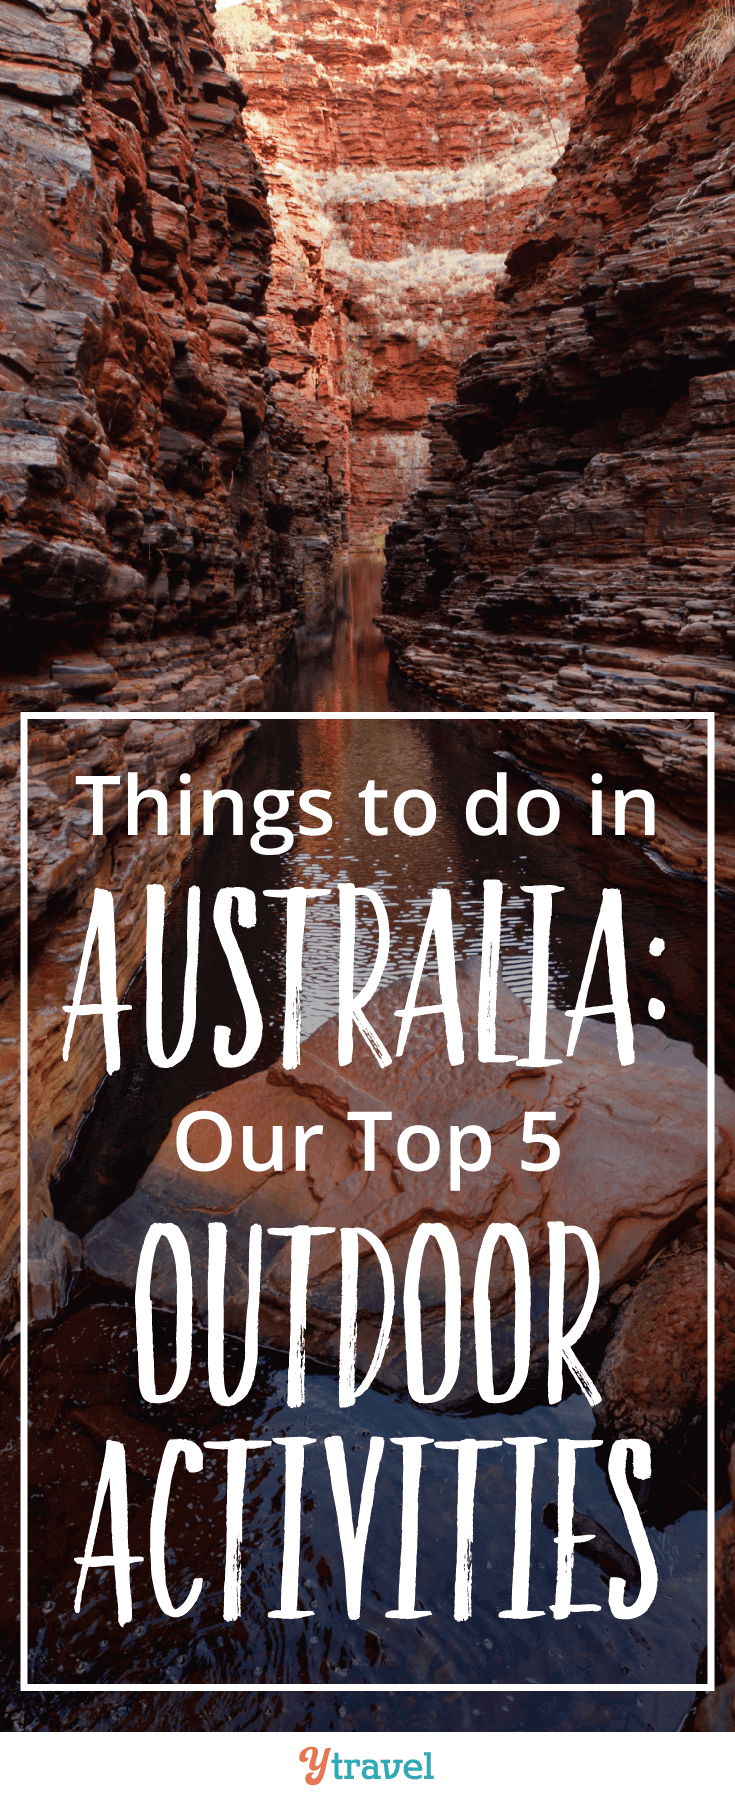 Looking for things to do in Australia? Check out our top 5 awesome outdoor activities!